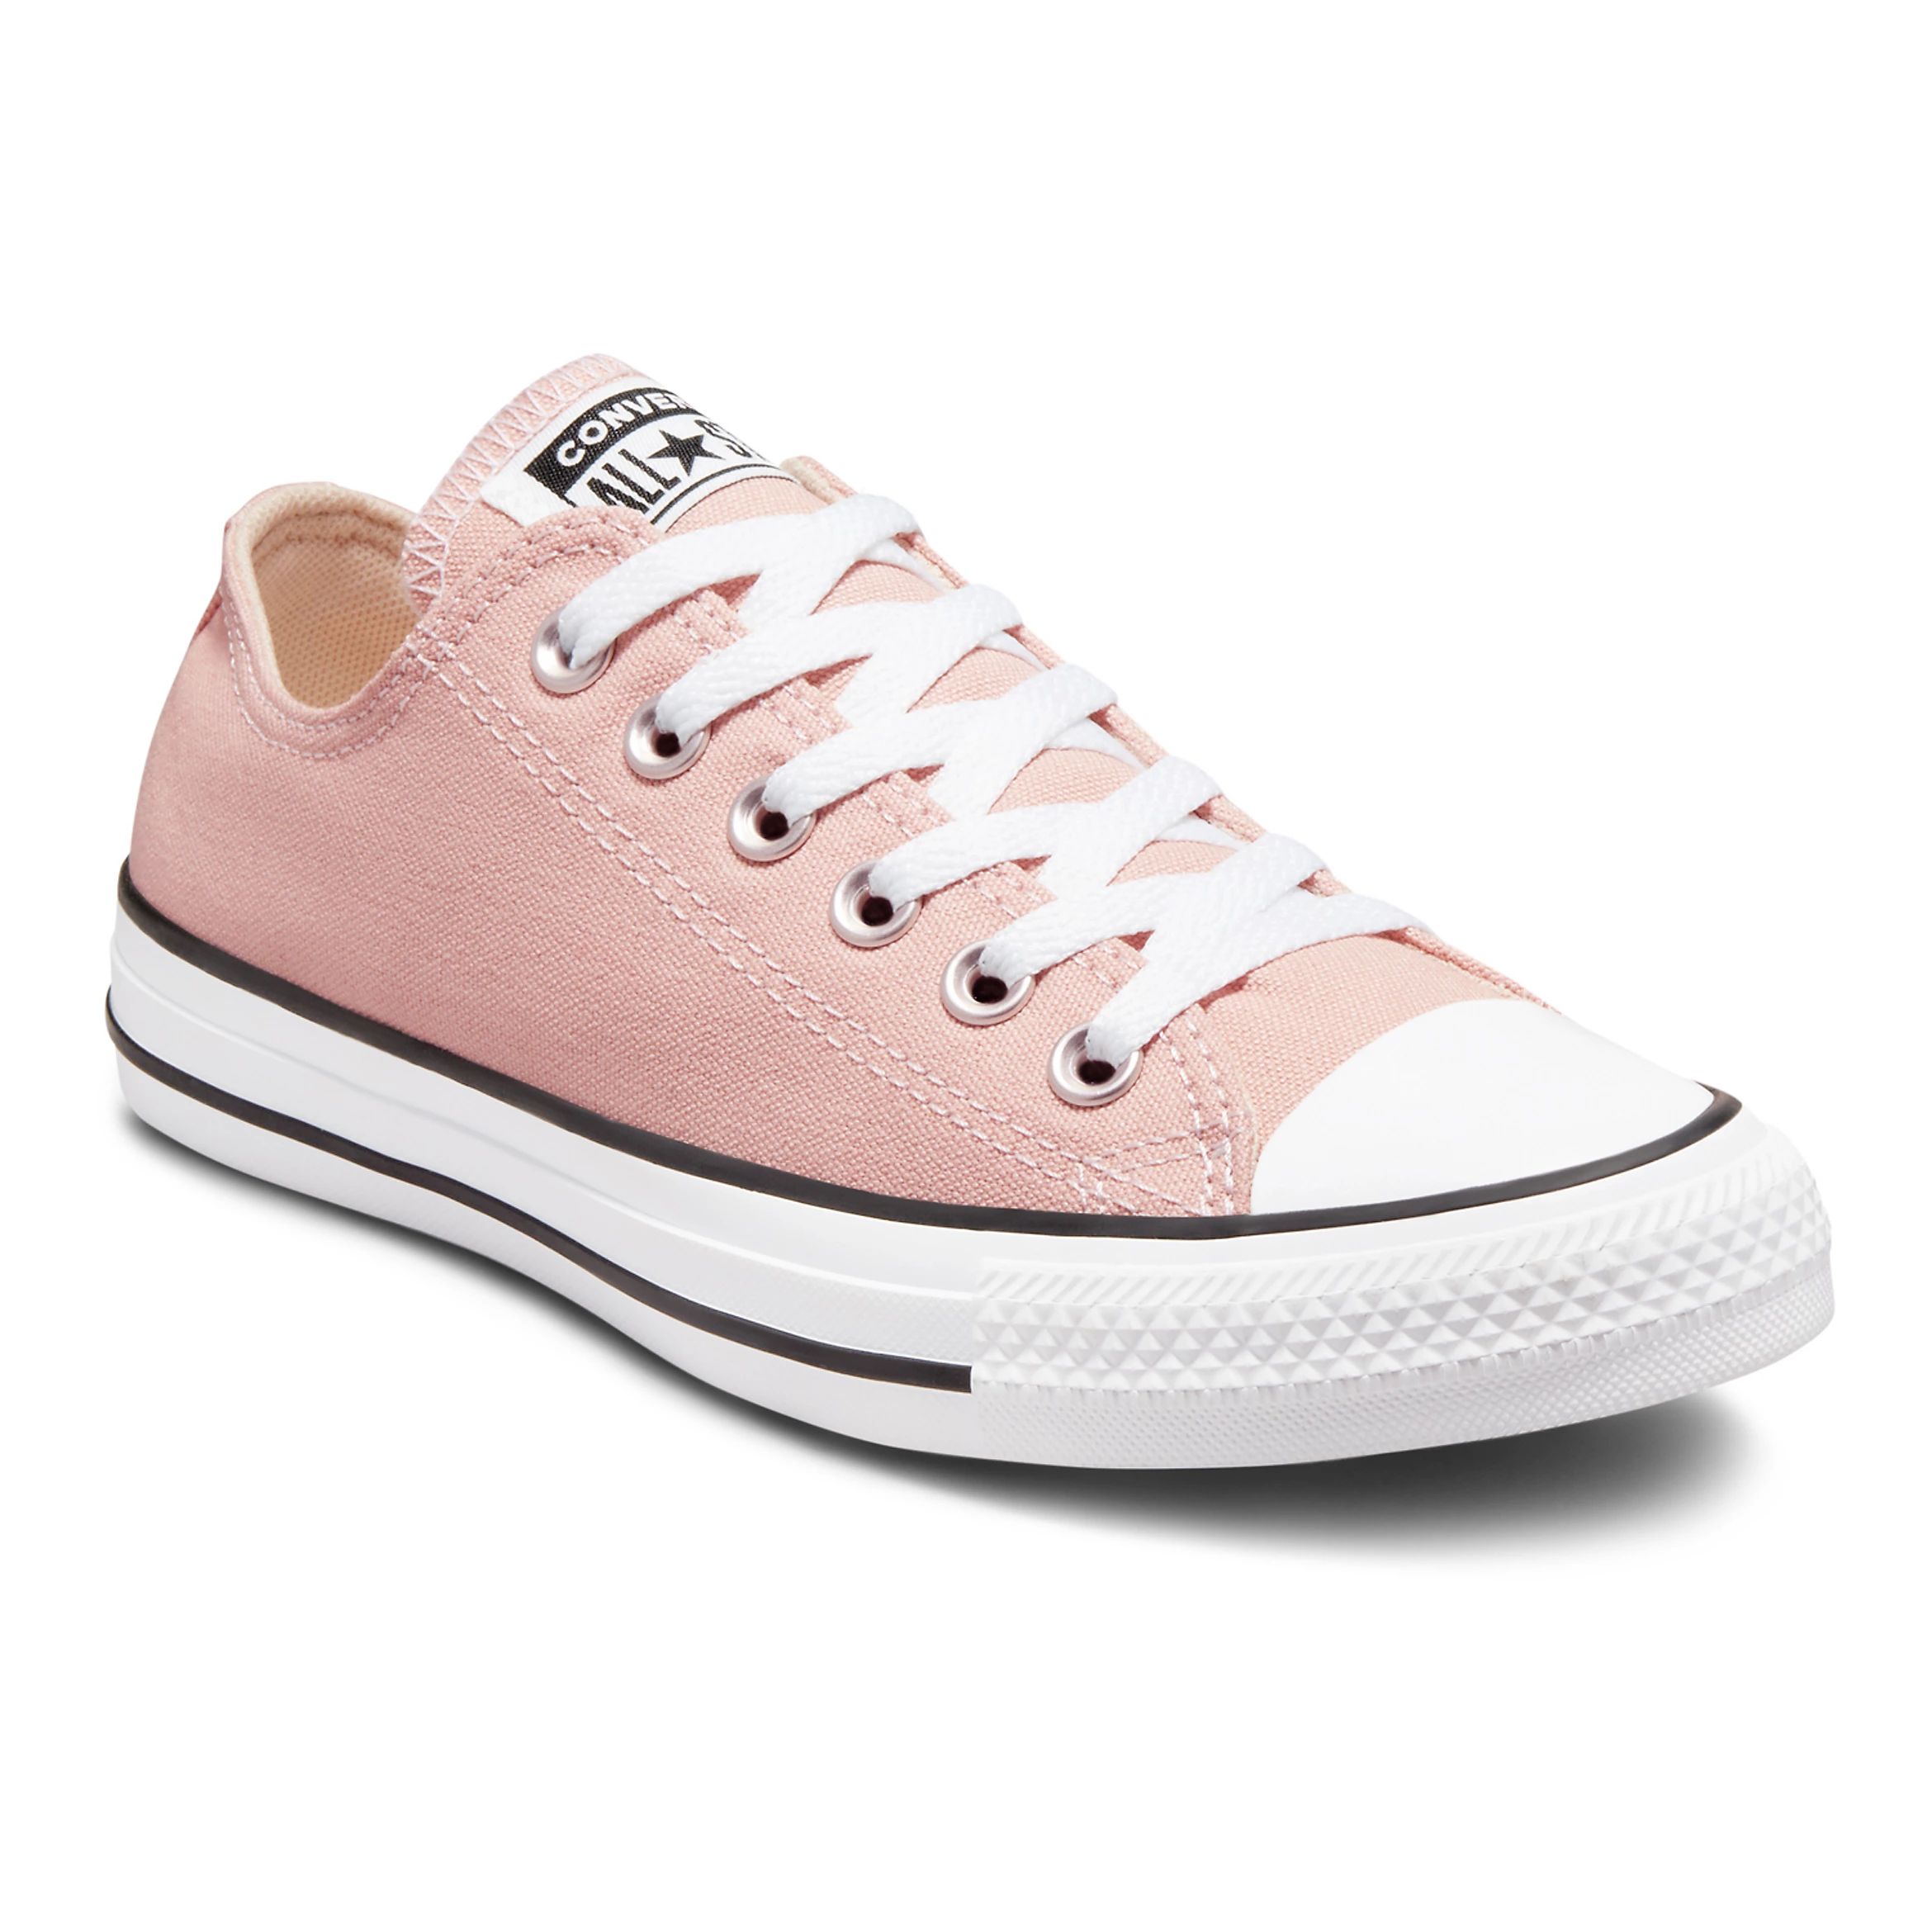 Converse Chuck Taylor All Star Women's Low Top Sneakersby Converse Be the first to   Write a Revi... | Kohl's